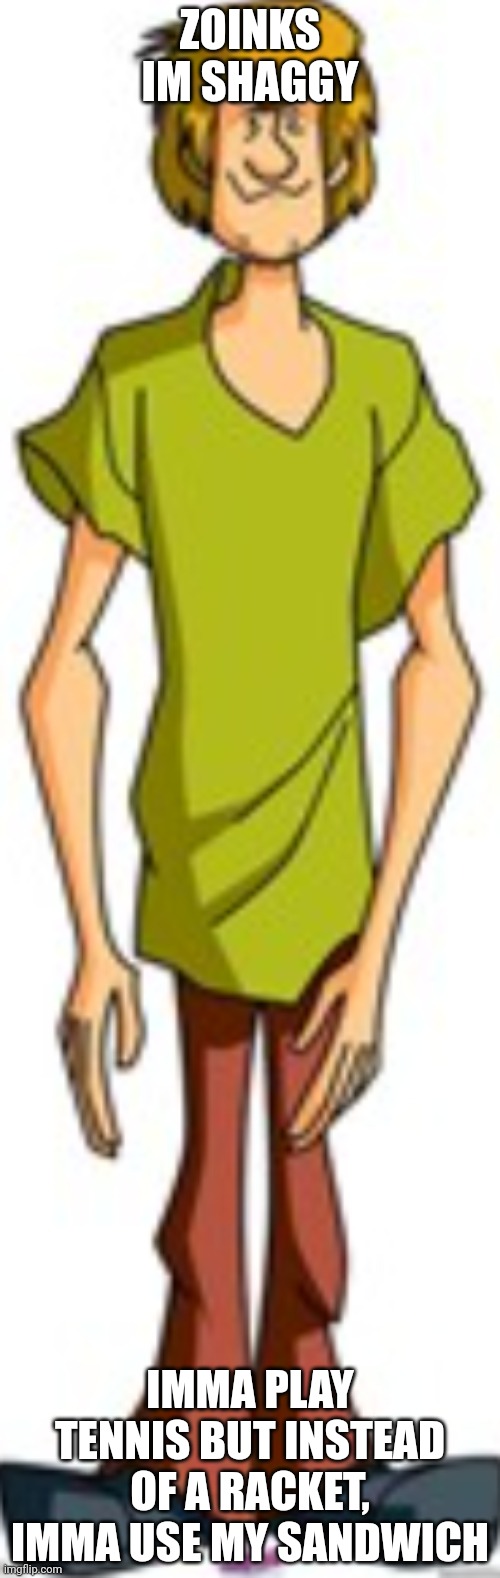 Shaggy Standing | ZOINKS IM SHAGGY; IMMA PLAY TENNIS BUT INSTEAD OF A RACKET, IMMA USE MY SANDWICH | image tagged in shaggy standing | made w/ Imgflip meme maker